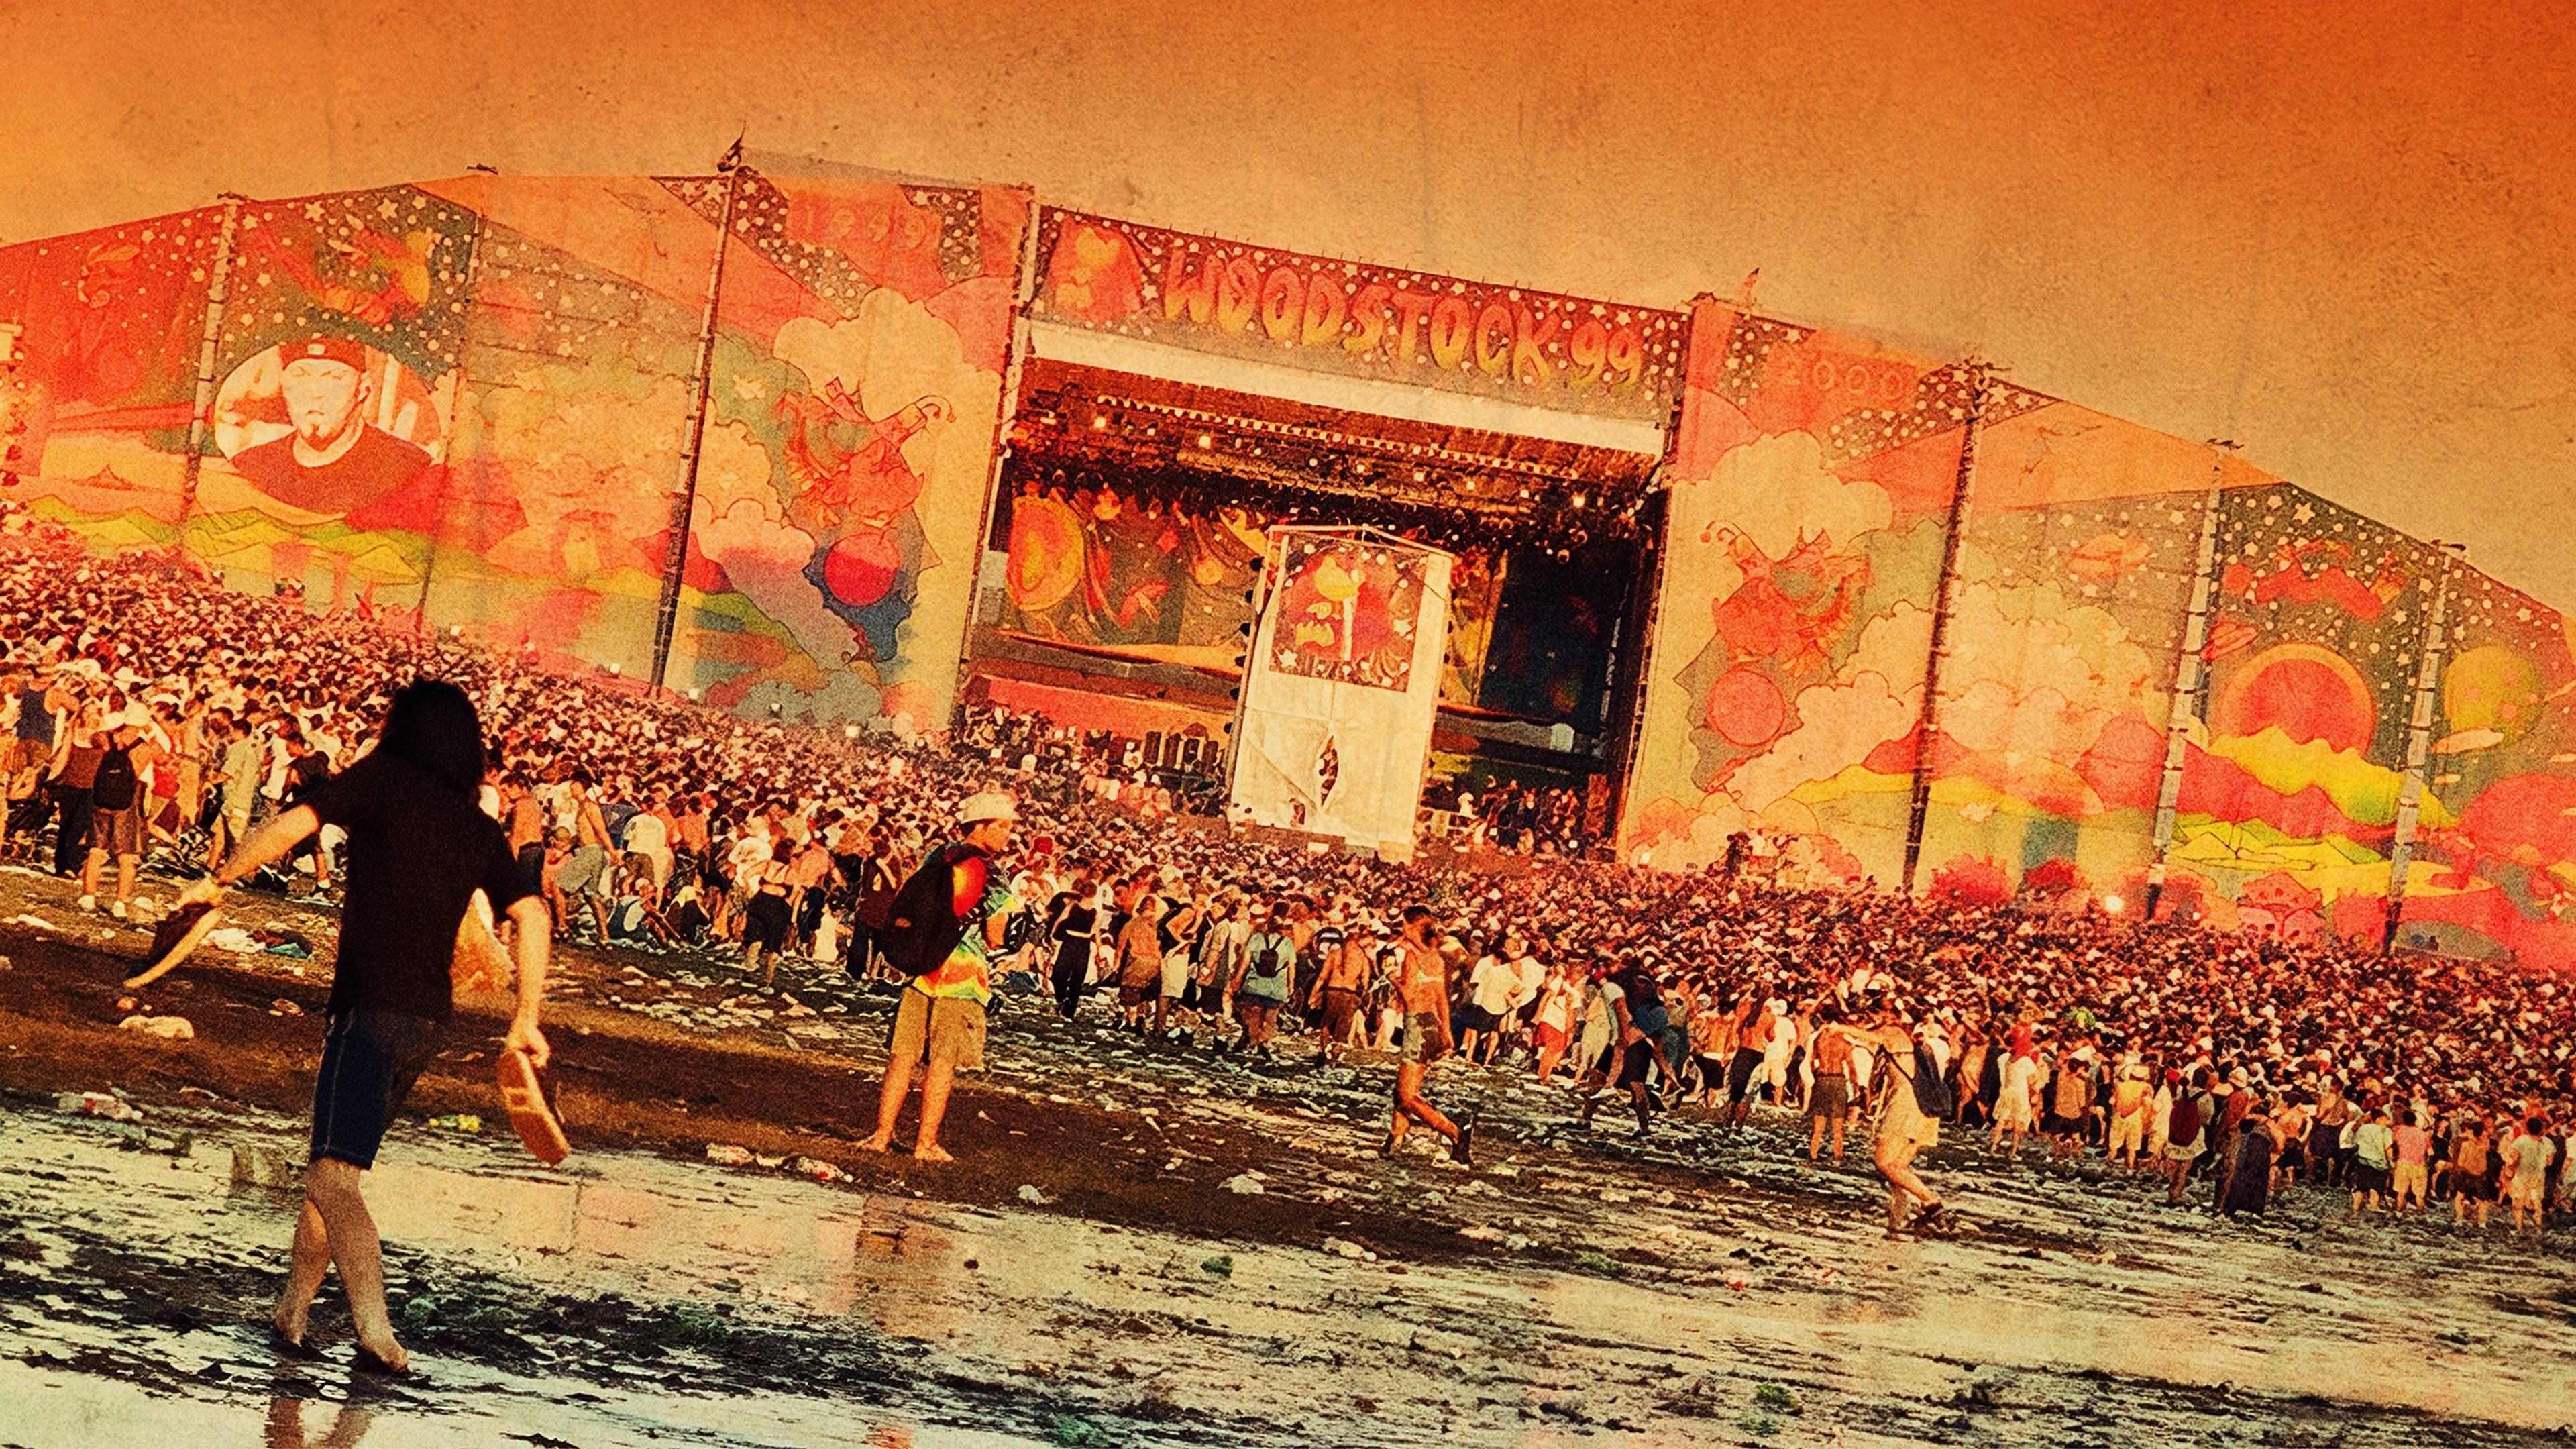 Woodstock 99: Peace, Love, and Rage backdrop